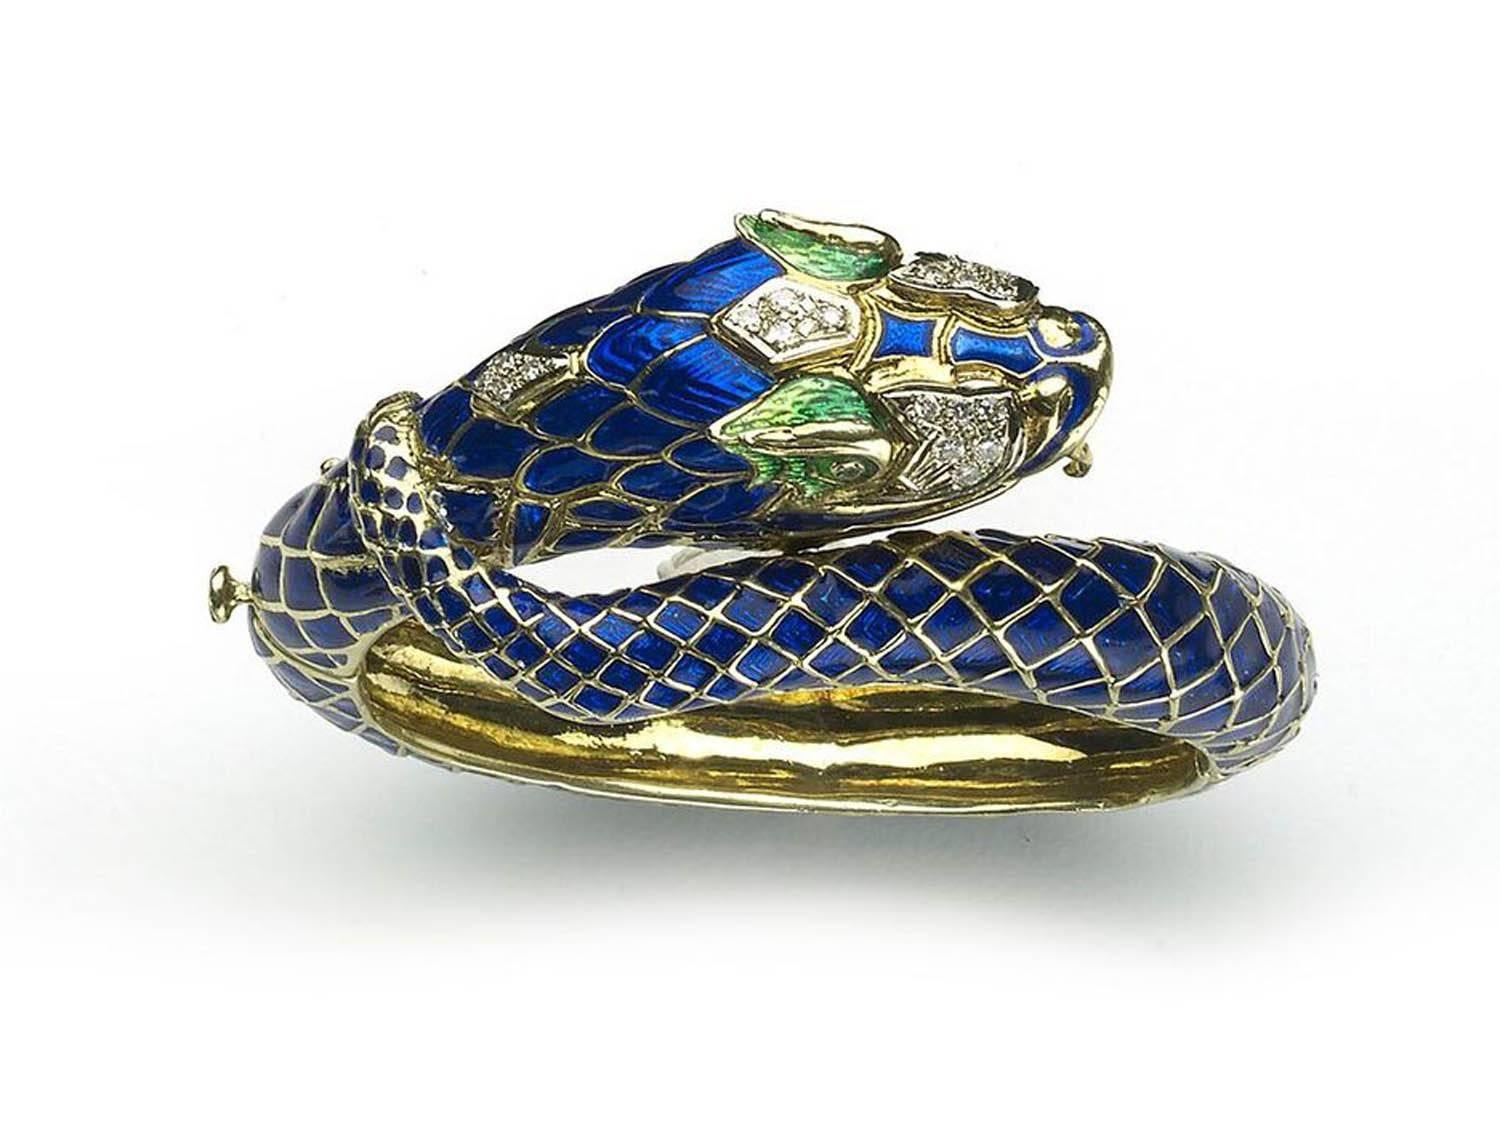 An enamel and diamond hinged snake bangle, with a blue enamel body, with green enamel detail around the eyes, and round brilliant cut diamonds set in the head, mounted in 18ct yellow gold. The inside diameter measures 43 x 55mm.